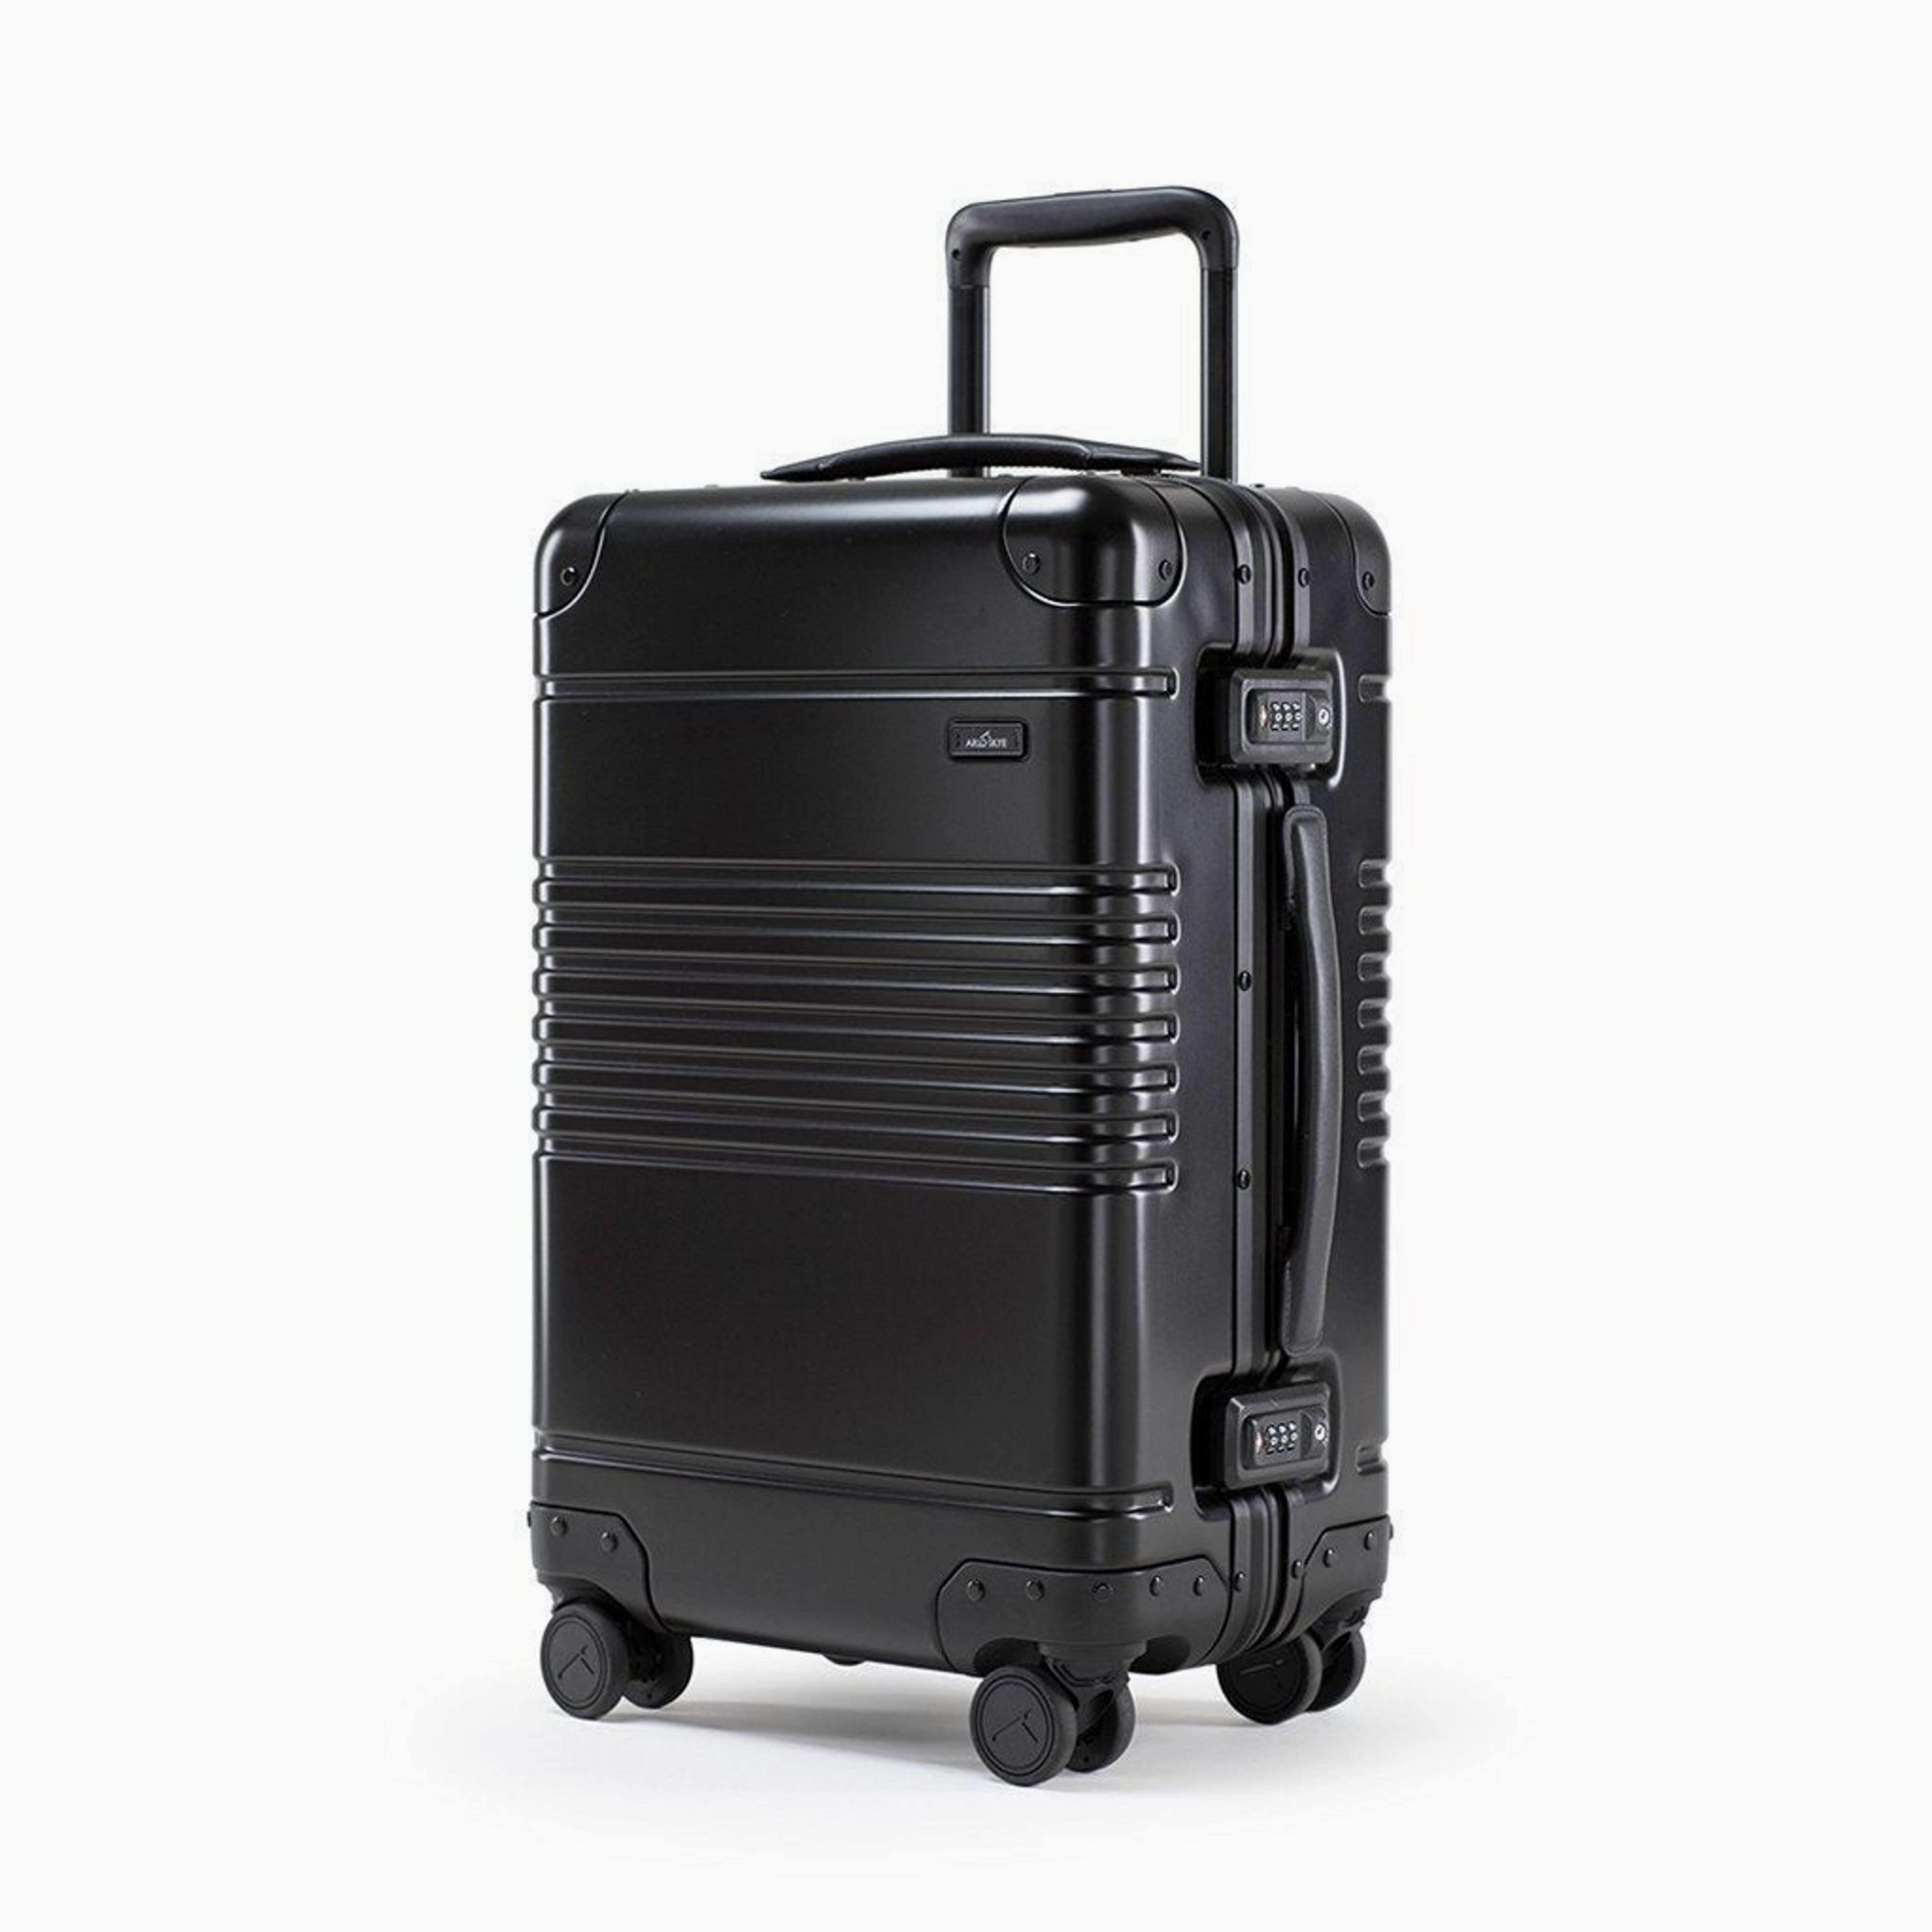 The Frame Carry-On: Aluminum Edition